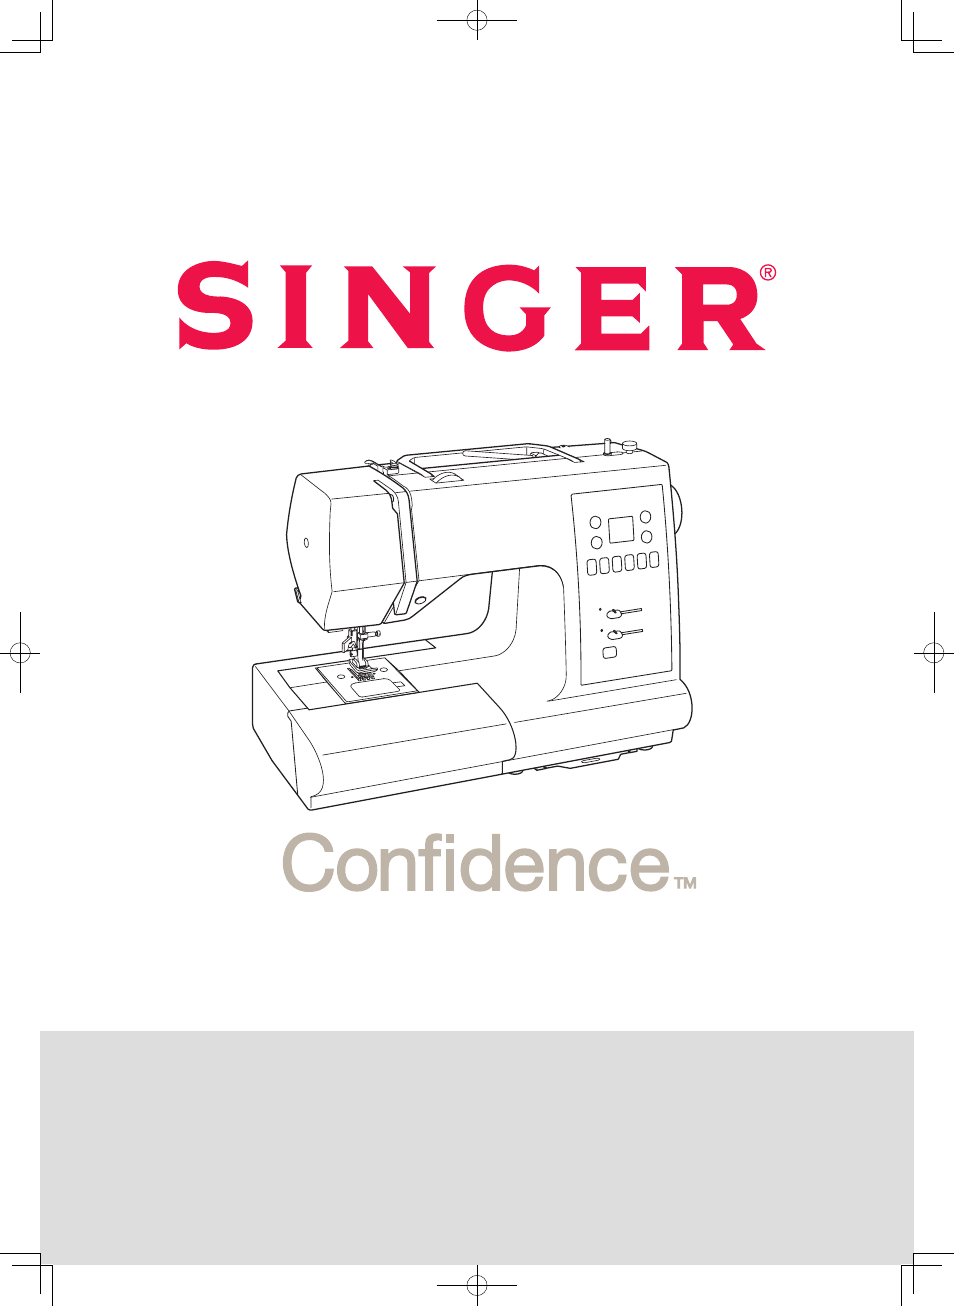 SINGER 7465 CONFIDENCE User Manual | 82 pages